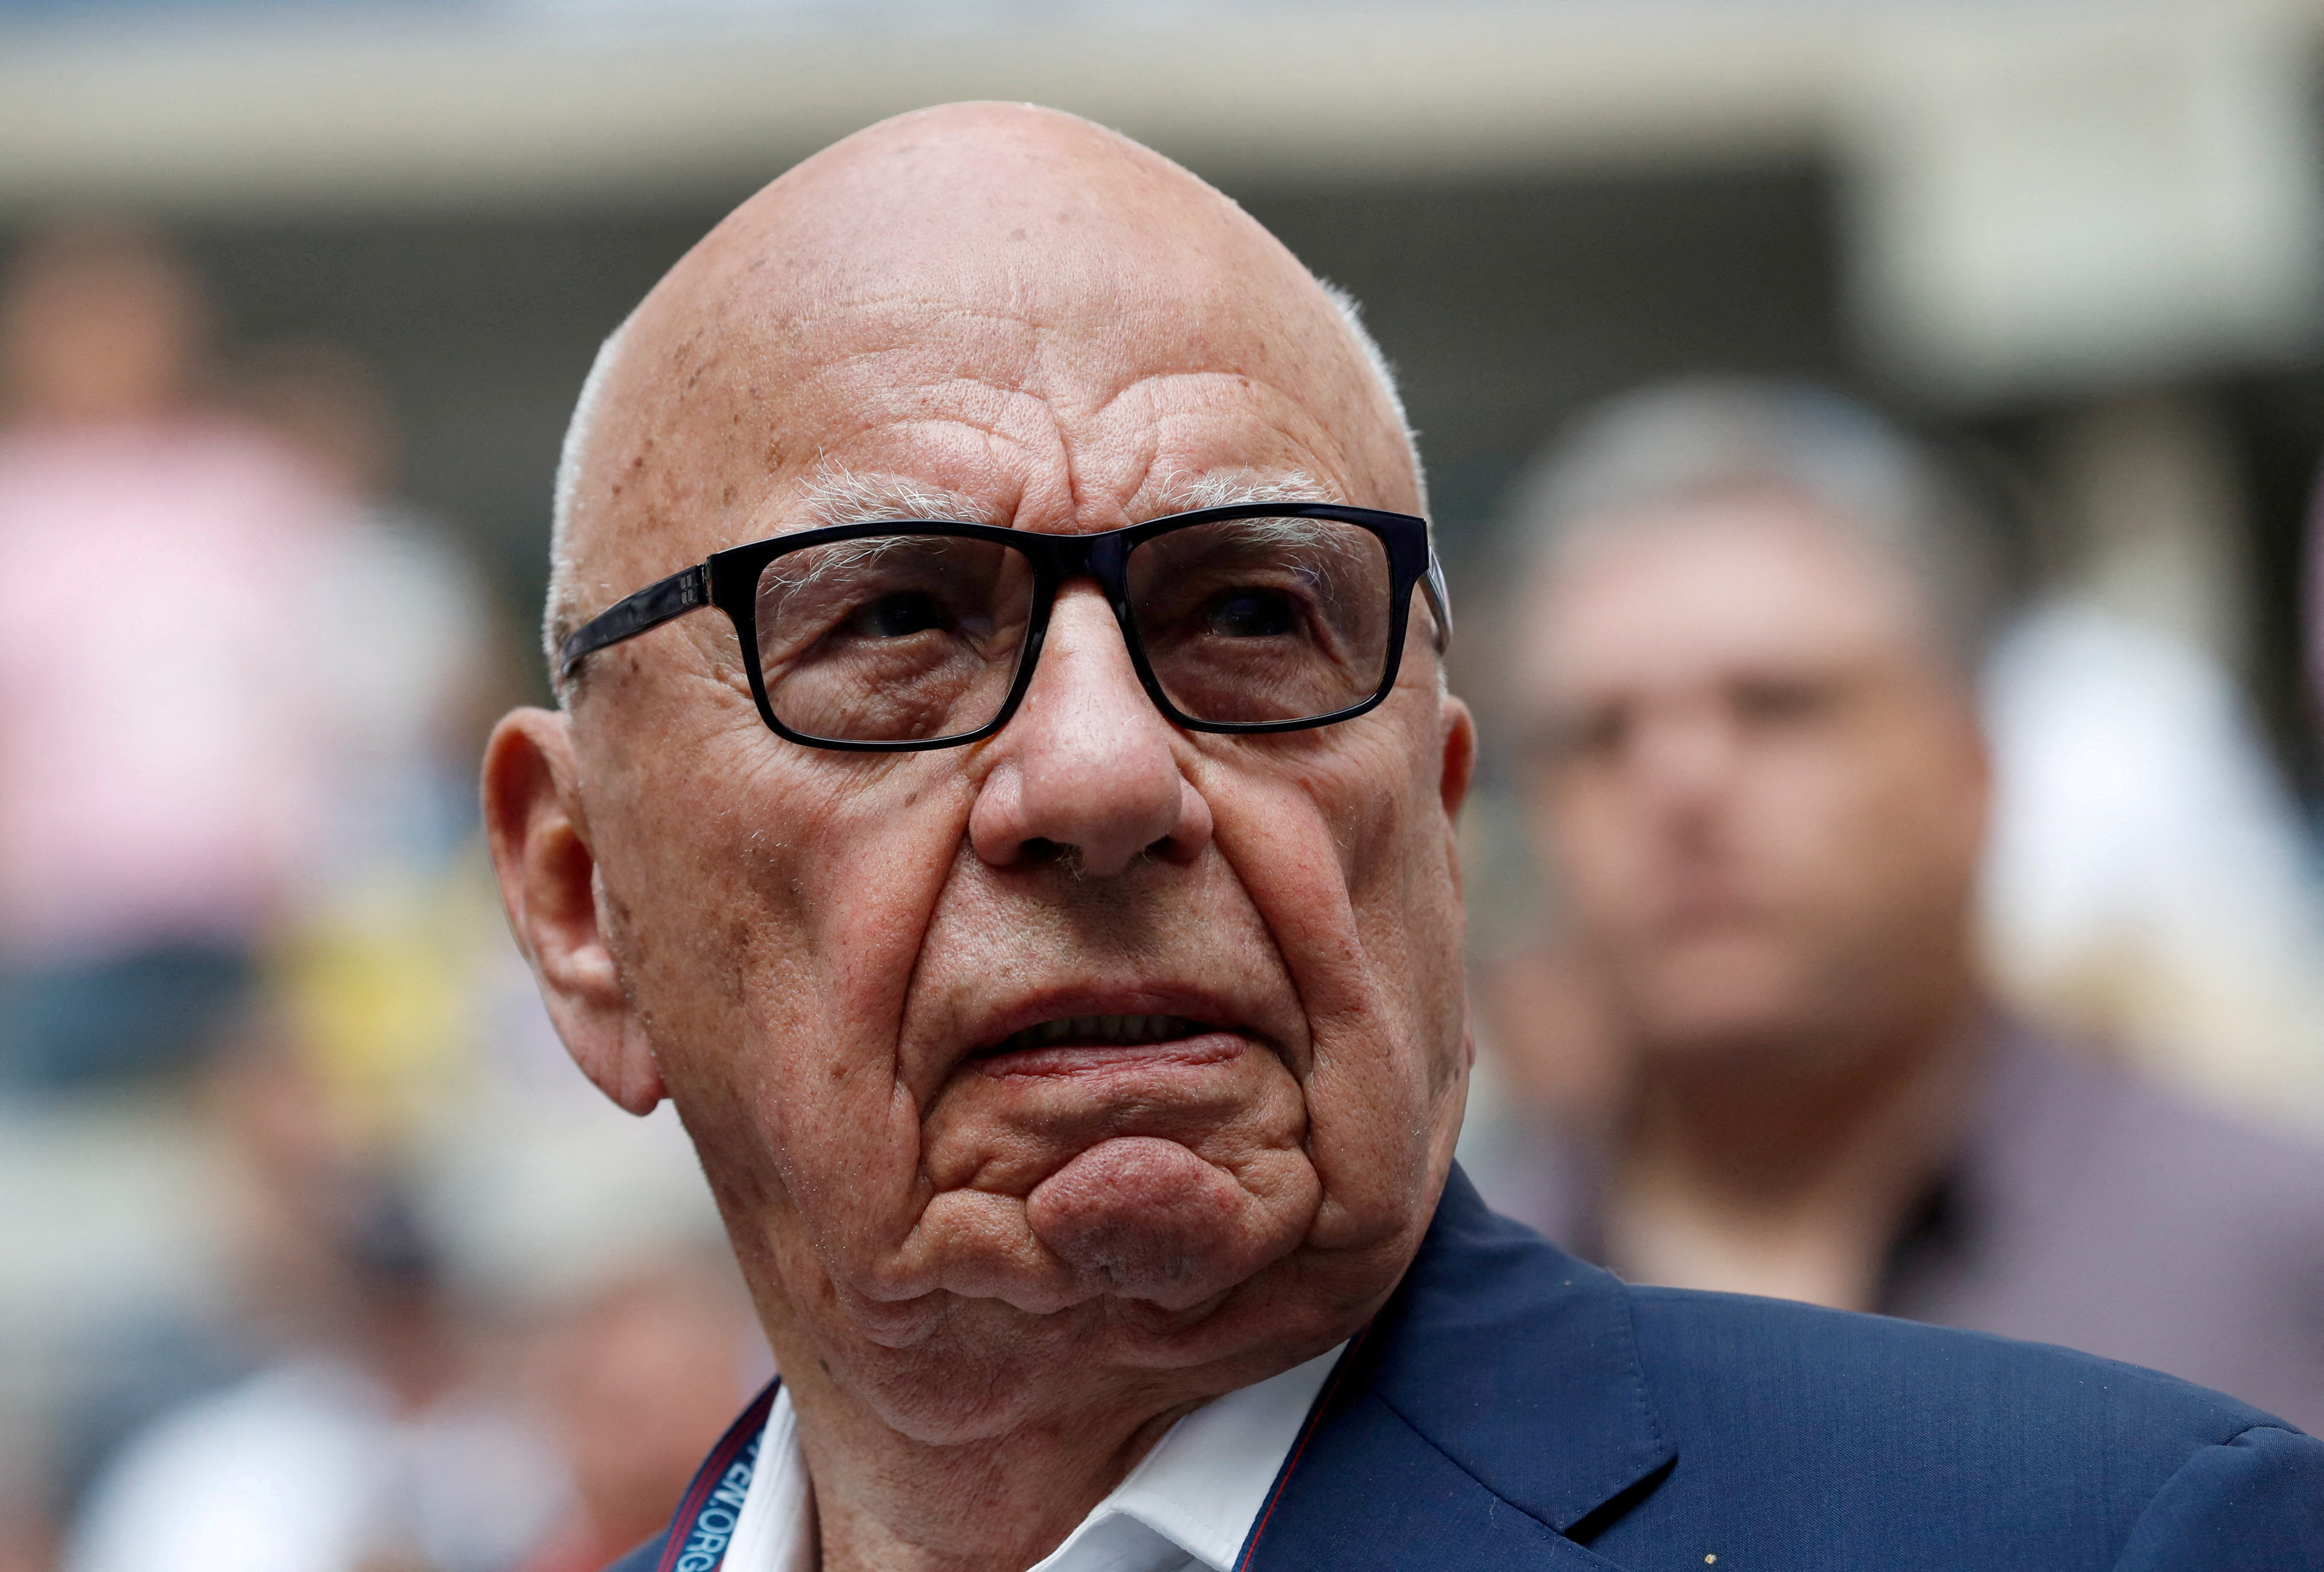 Rupert Murdoch, Chairman of Fox News Channel stands before Rafael Nadal of Spain plays against Kevin Anderson of South Africa on September 10, 2017.